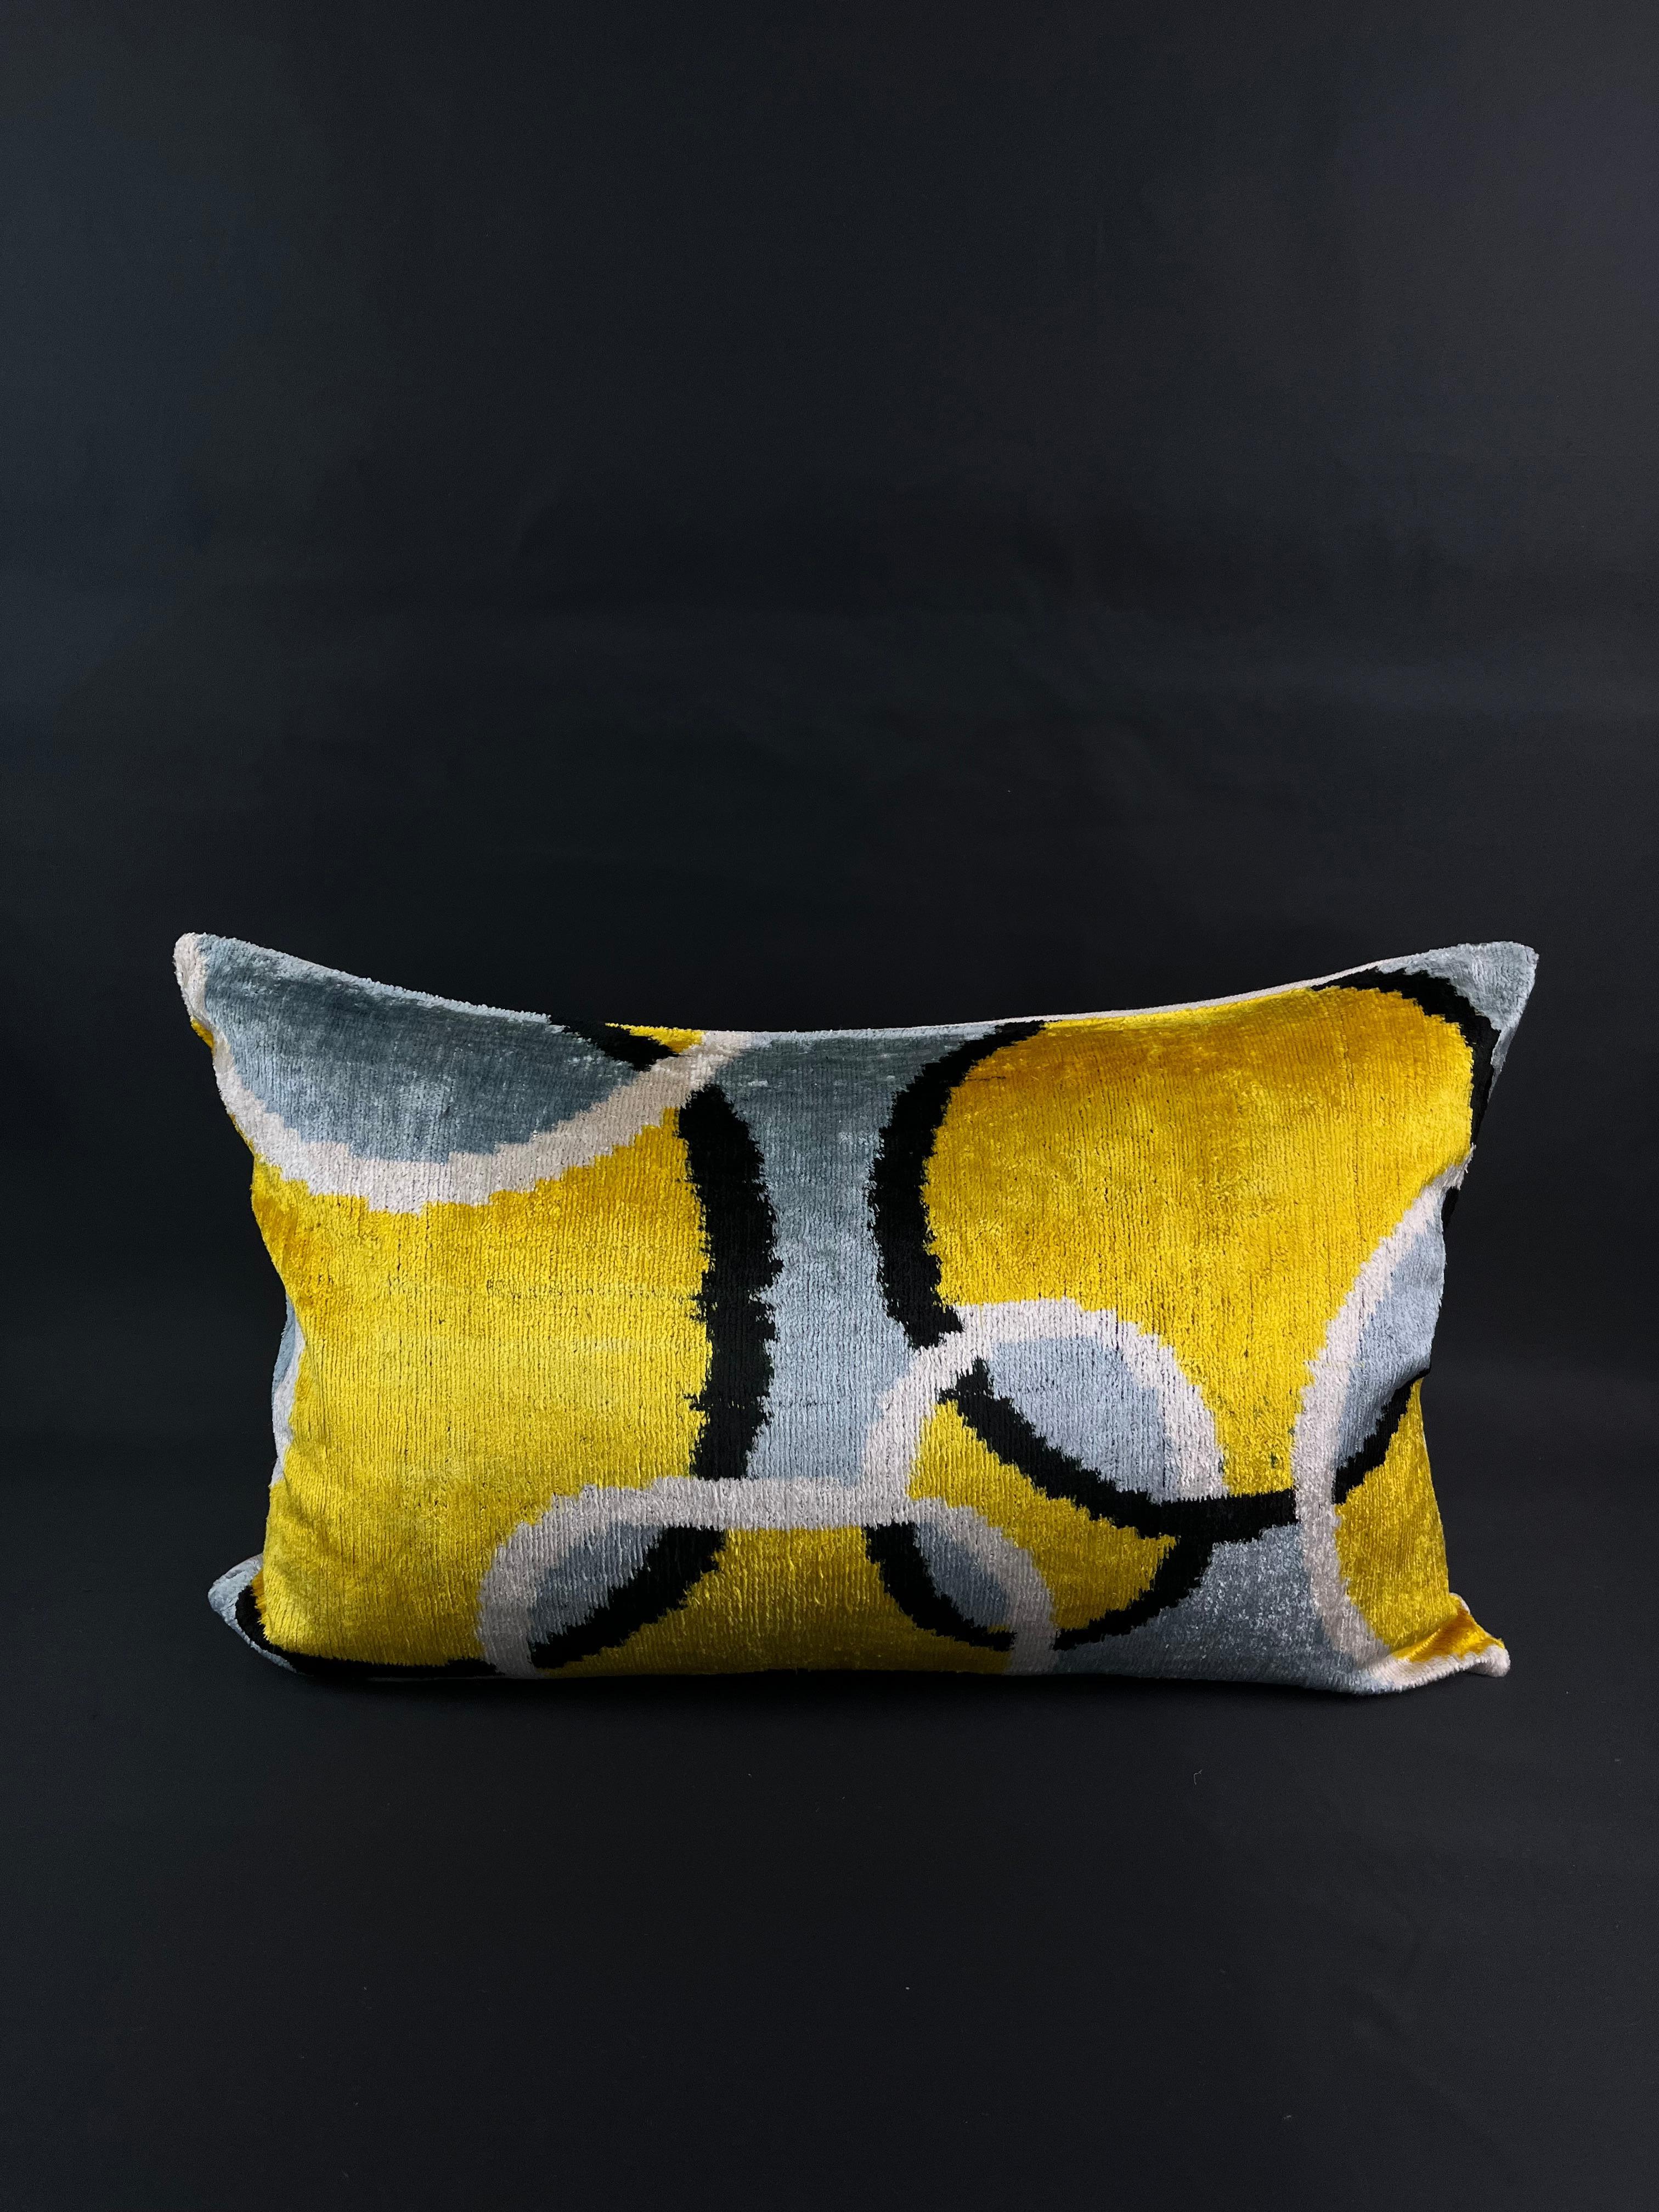 Grey and Yellow Geometric Circle Design Velvet Silk Ikat Pillow Cover In New Condition For Sale In Houston, TX